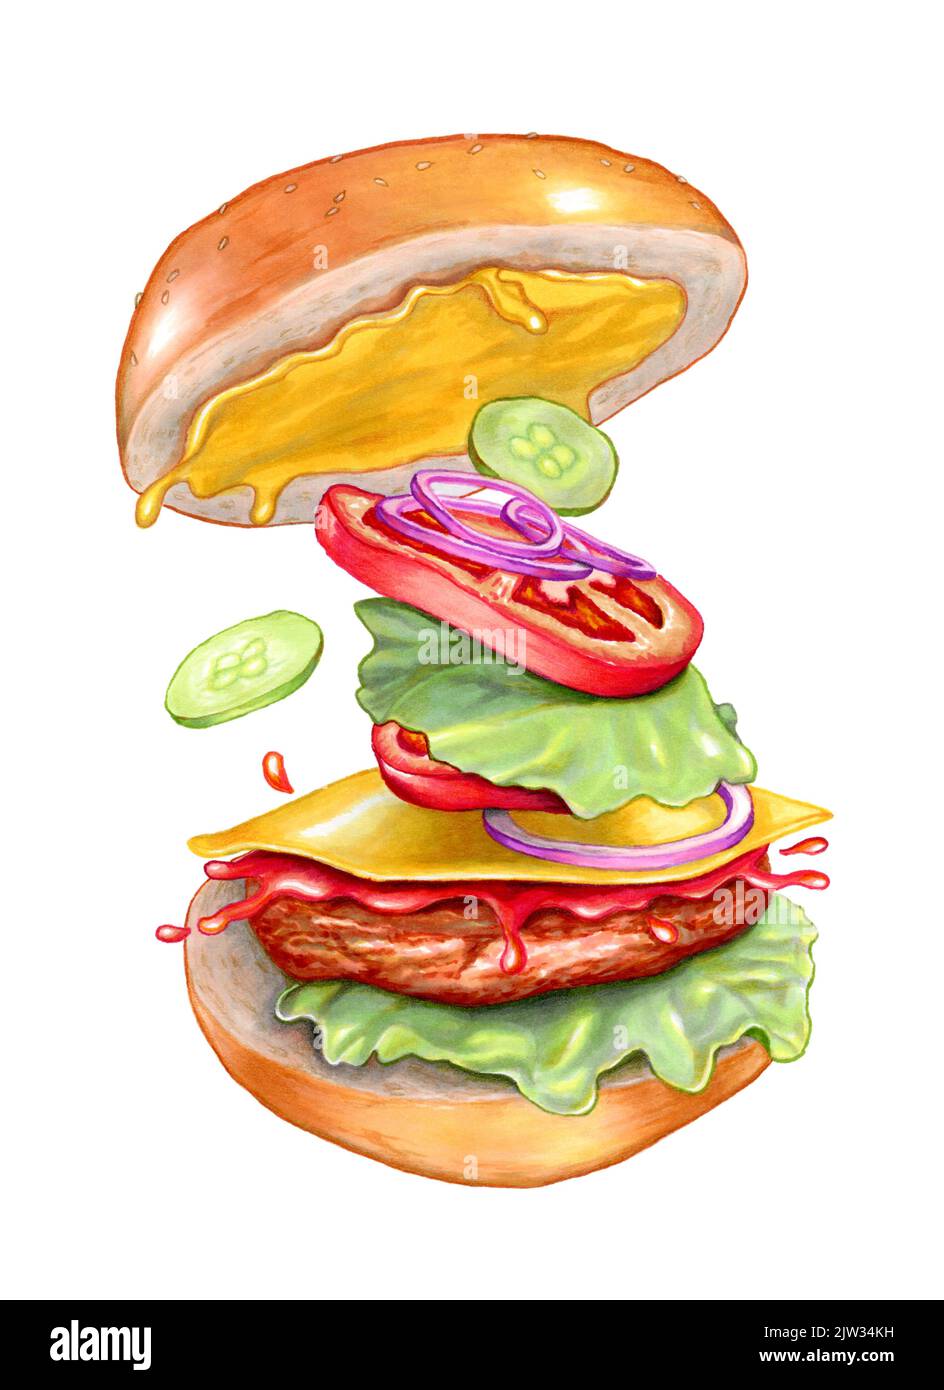 Exploding hamburger showing its ingredients falling down. Traditional illustration on paper. Stock Photo